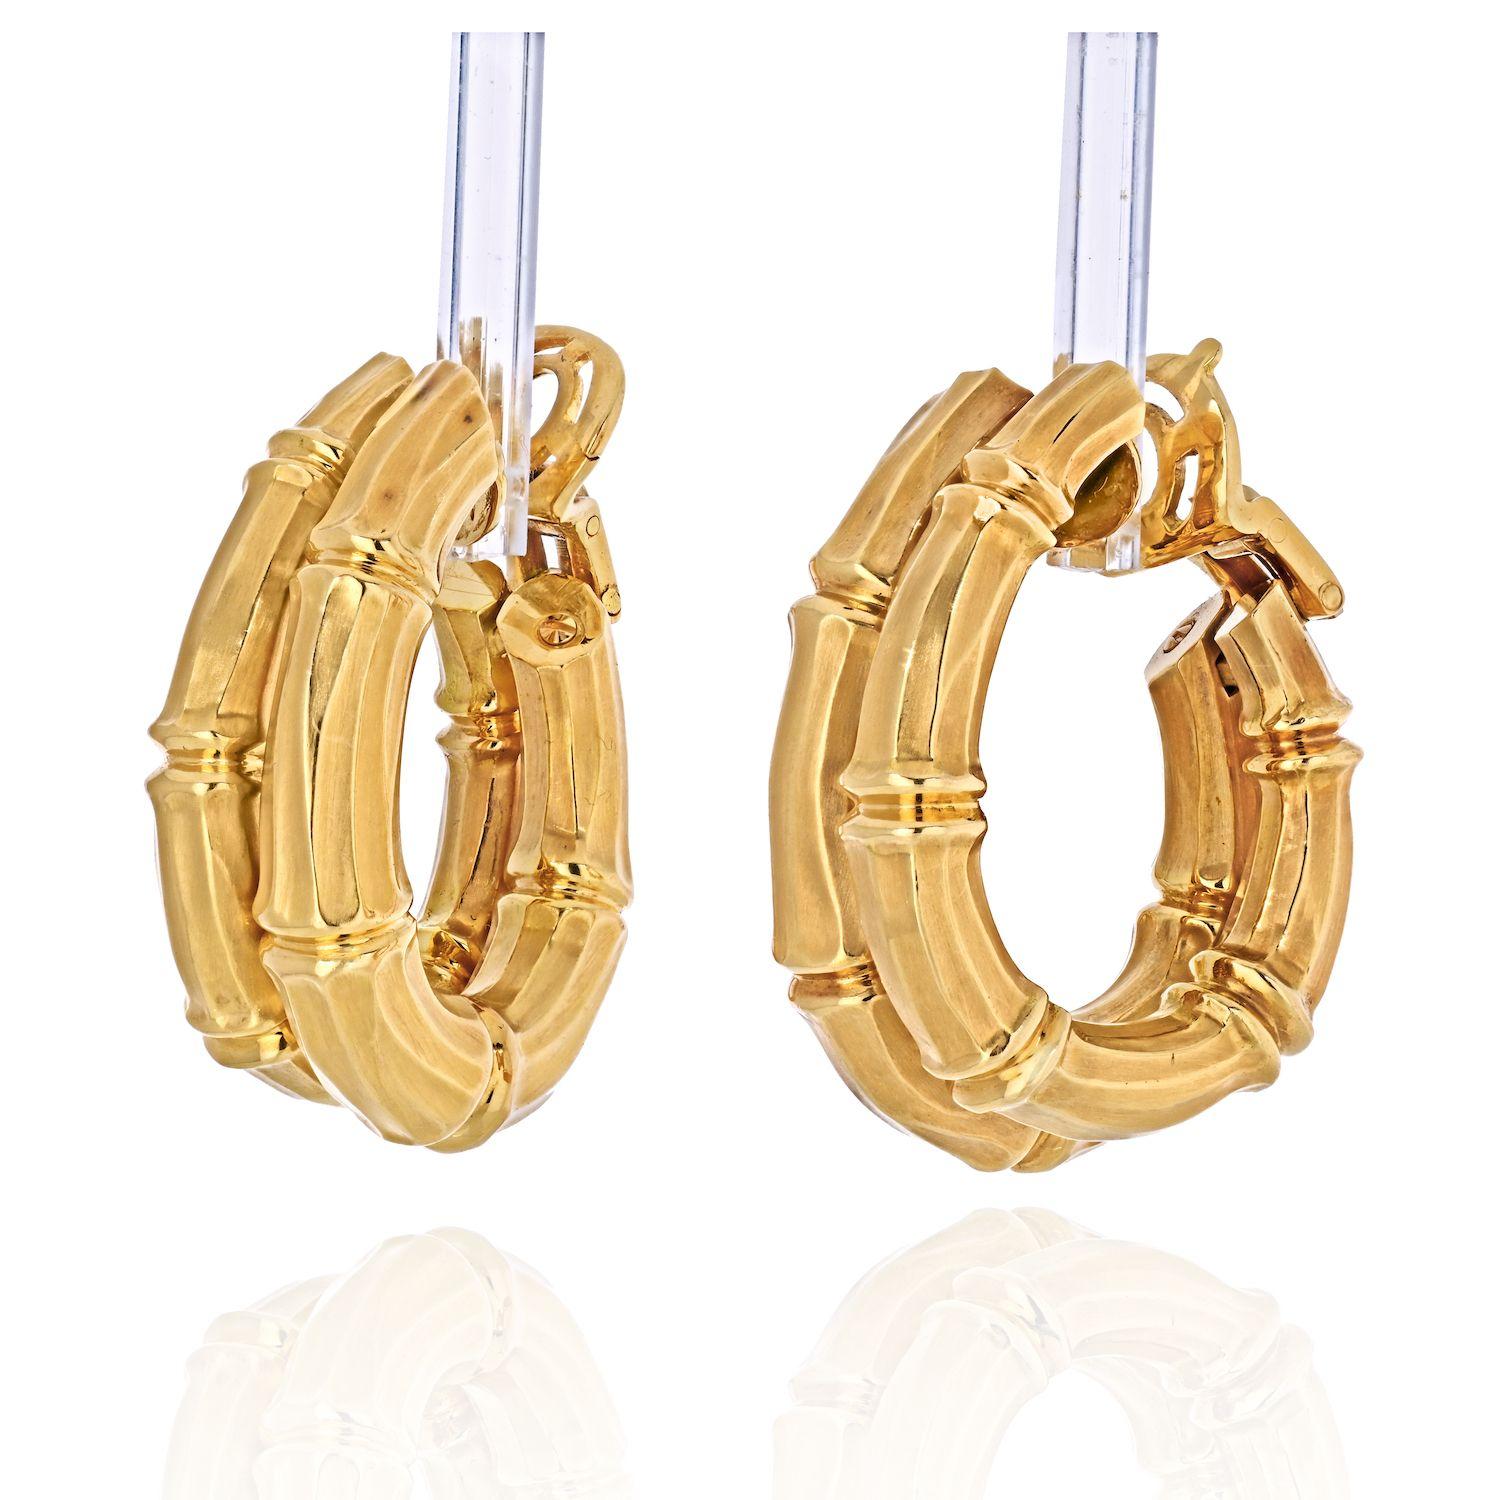 Cartier 18K Yellow Gold Double Bamboo Earrings. 
A beautiful pair of Cartier Gold Bamboo Earrings. Each earring depicts a double row of bamboo unaligned. These Cartier gold bamboo earrings are clip-on hoop earrings, circa 1990, stamped and